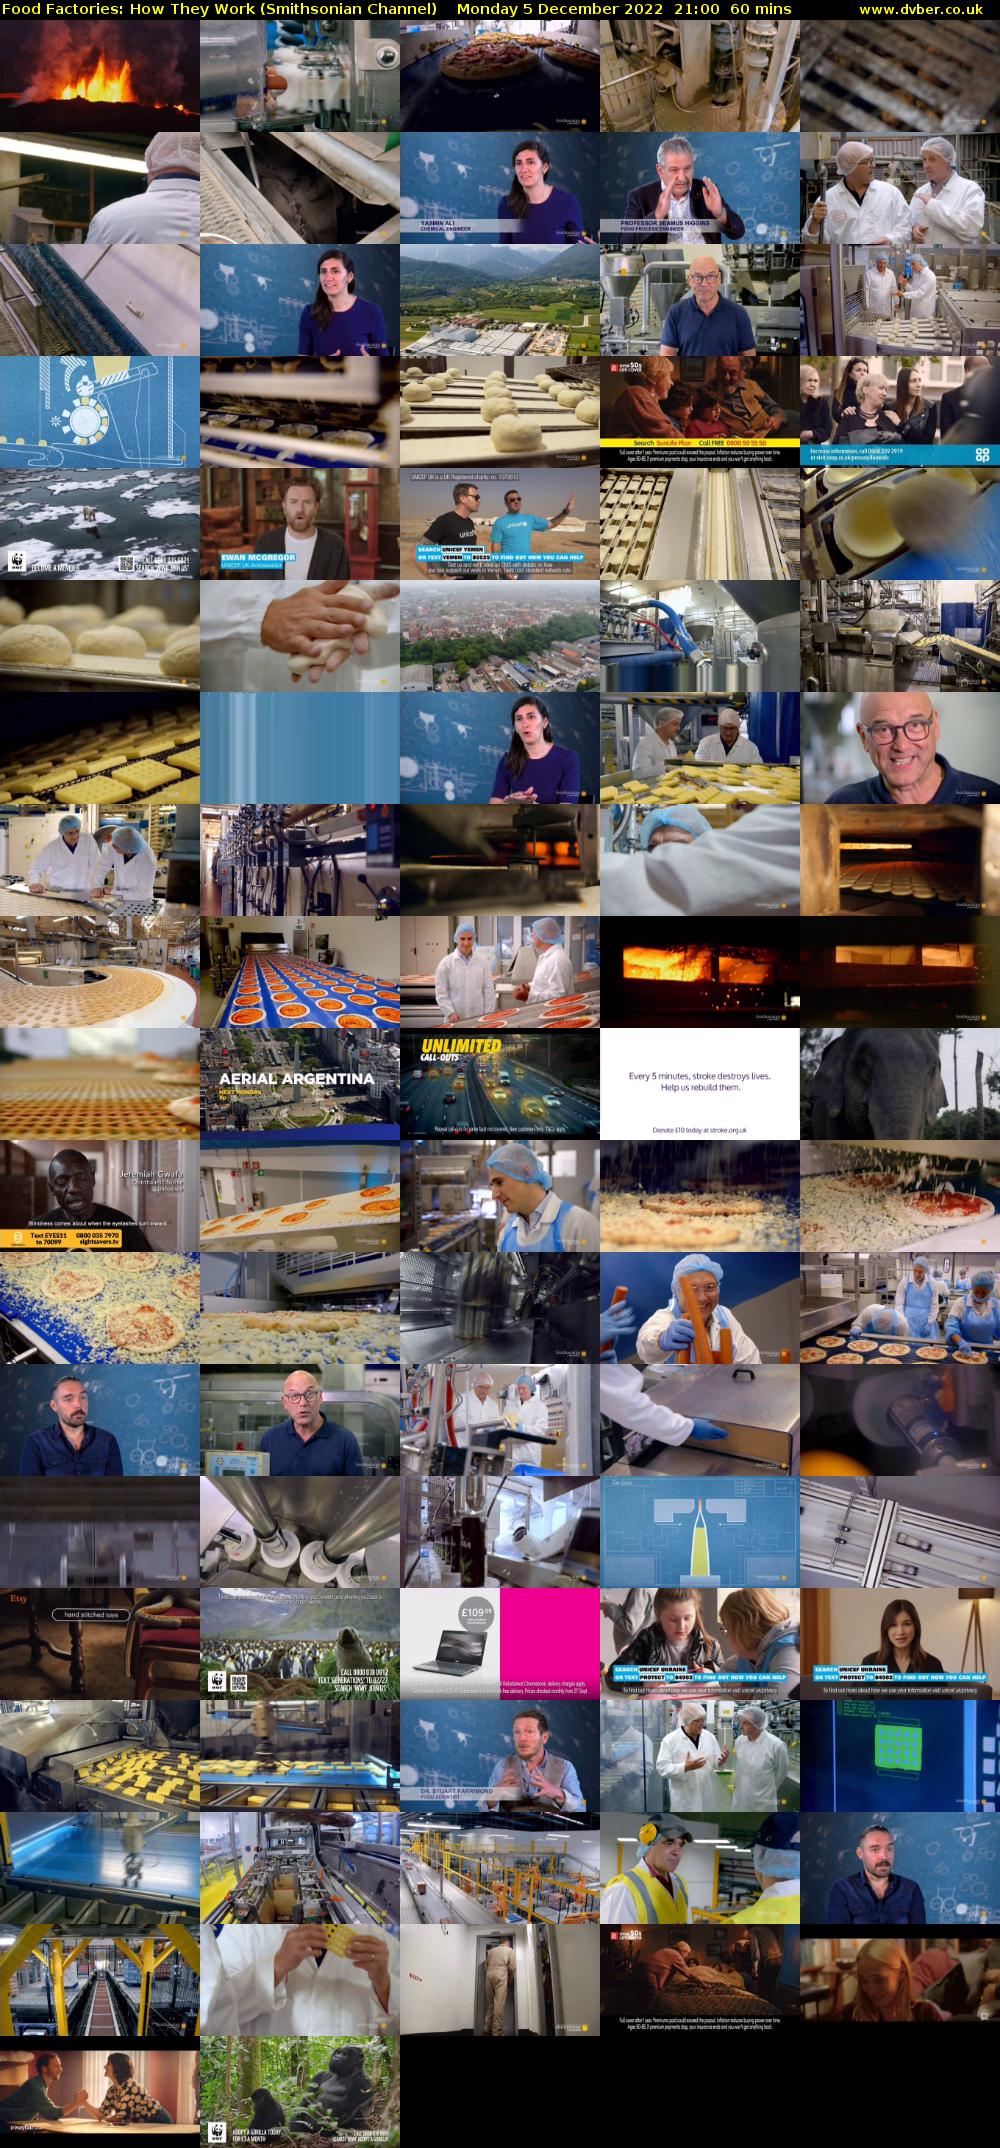 Food Factories: How They Work (Smithsonian Channel) Monday 5 December 2022 21:00 - 22:00